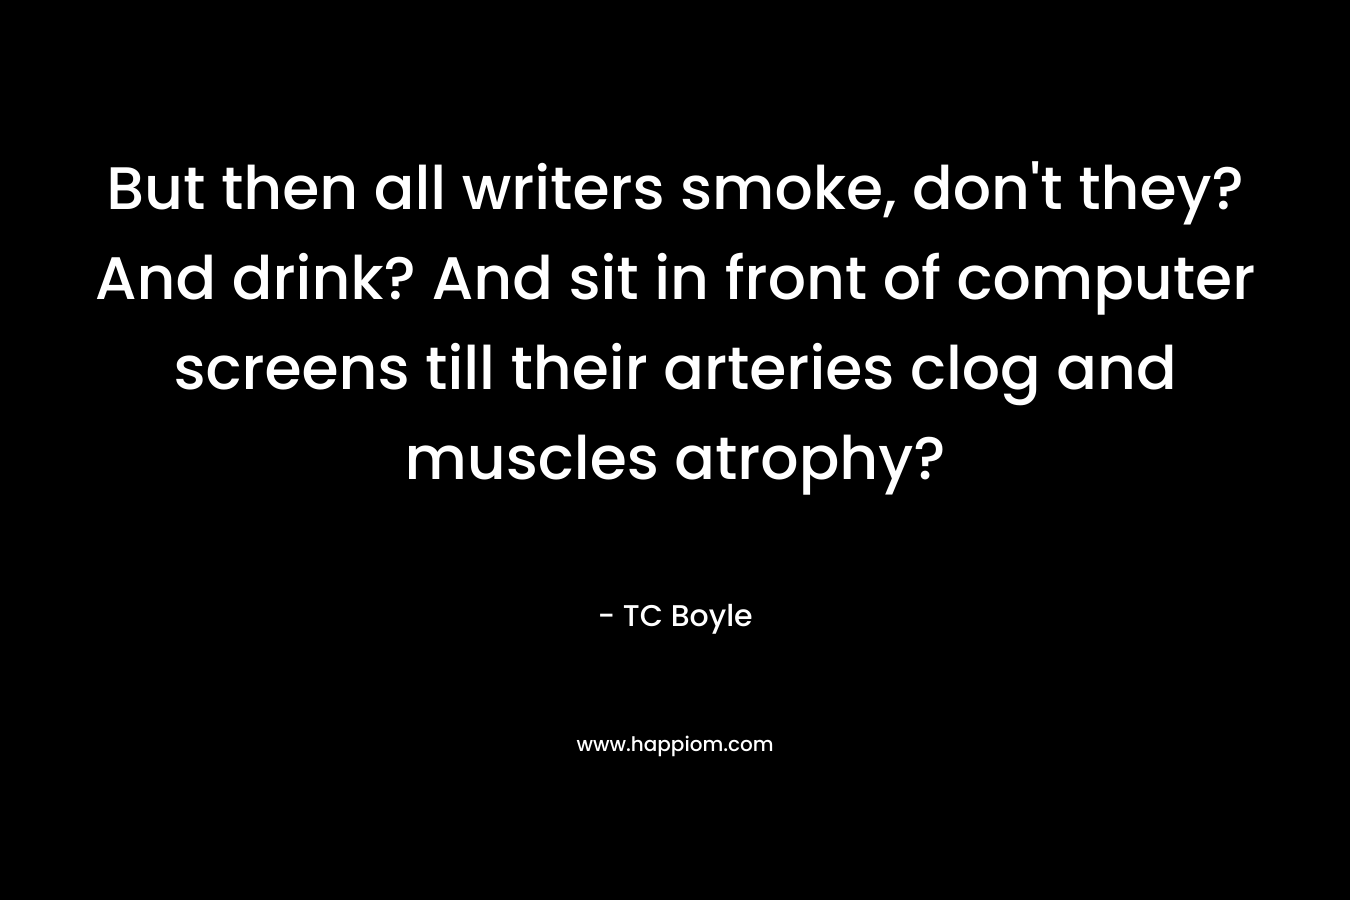 But then all writers smoke, don’t they? And drink? And sit in front of computer screens till their arteries clog and muscles atrophy? – TC Boyle